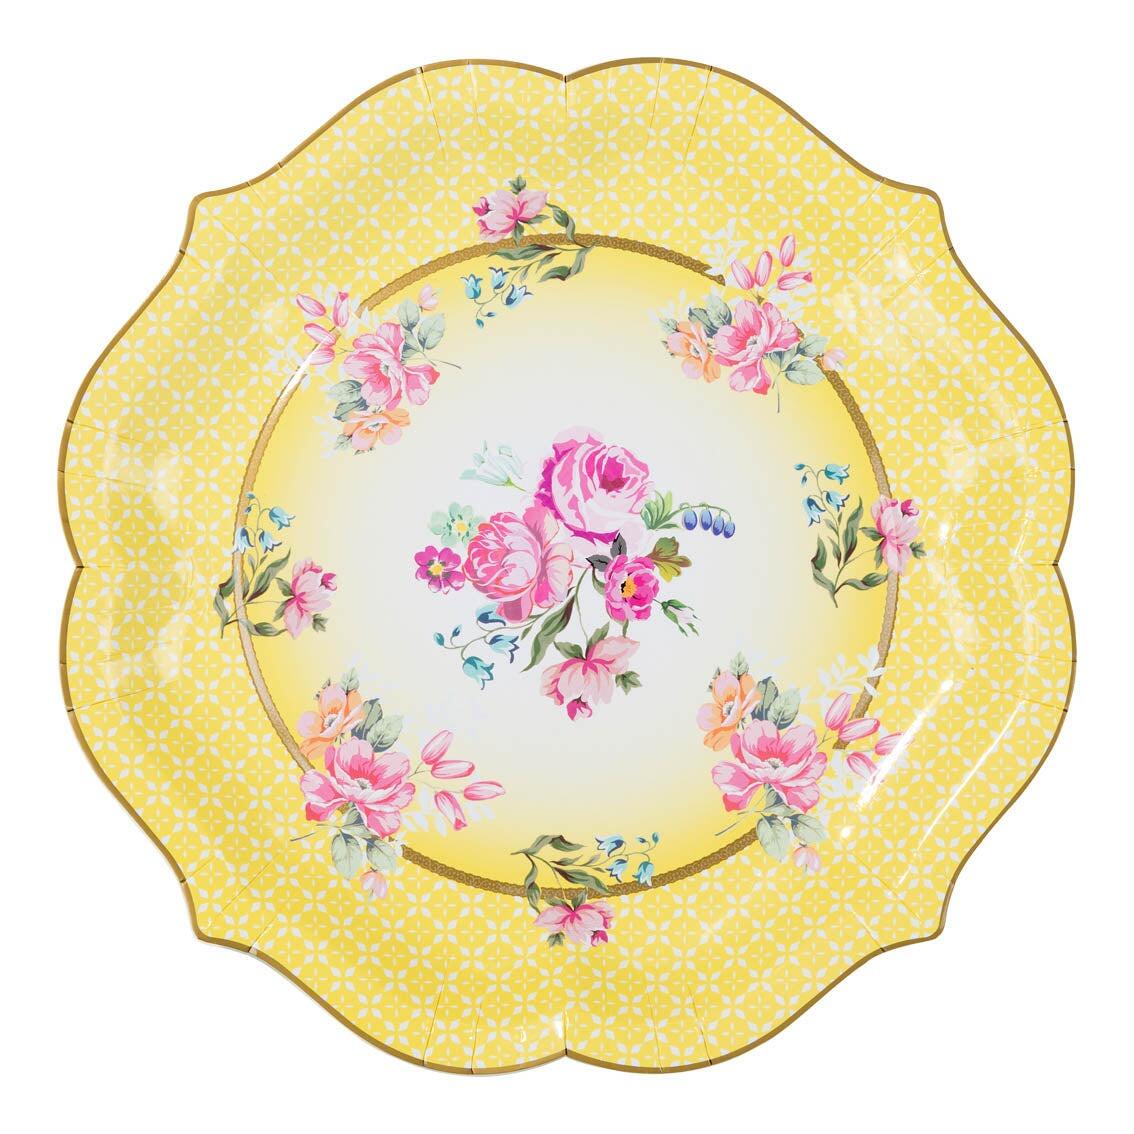 Disposable truly scrumptious serving party plate yellow